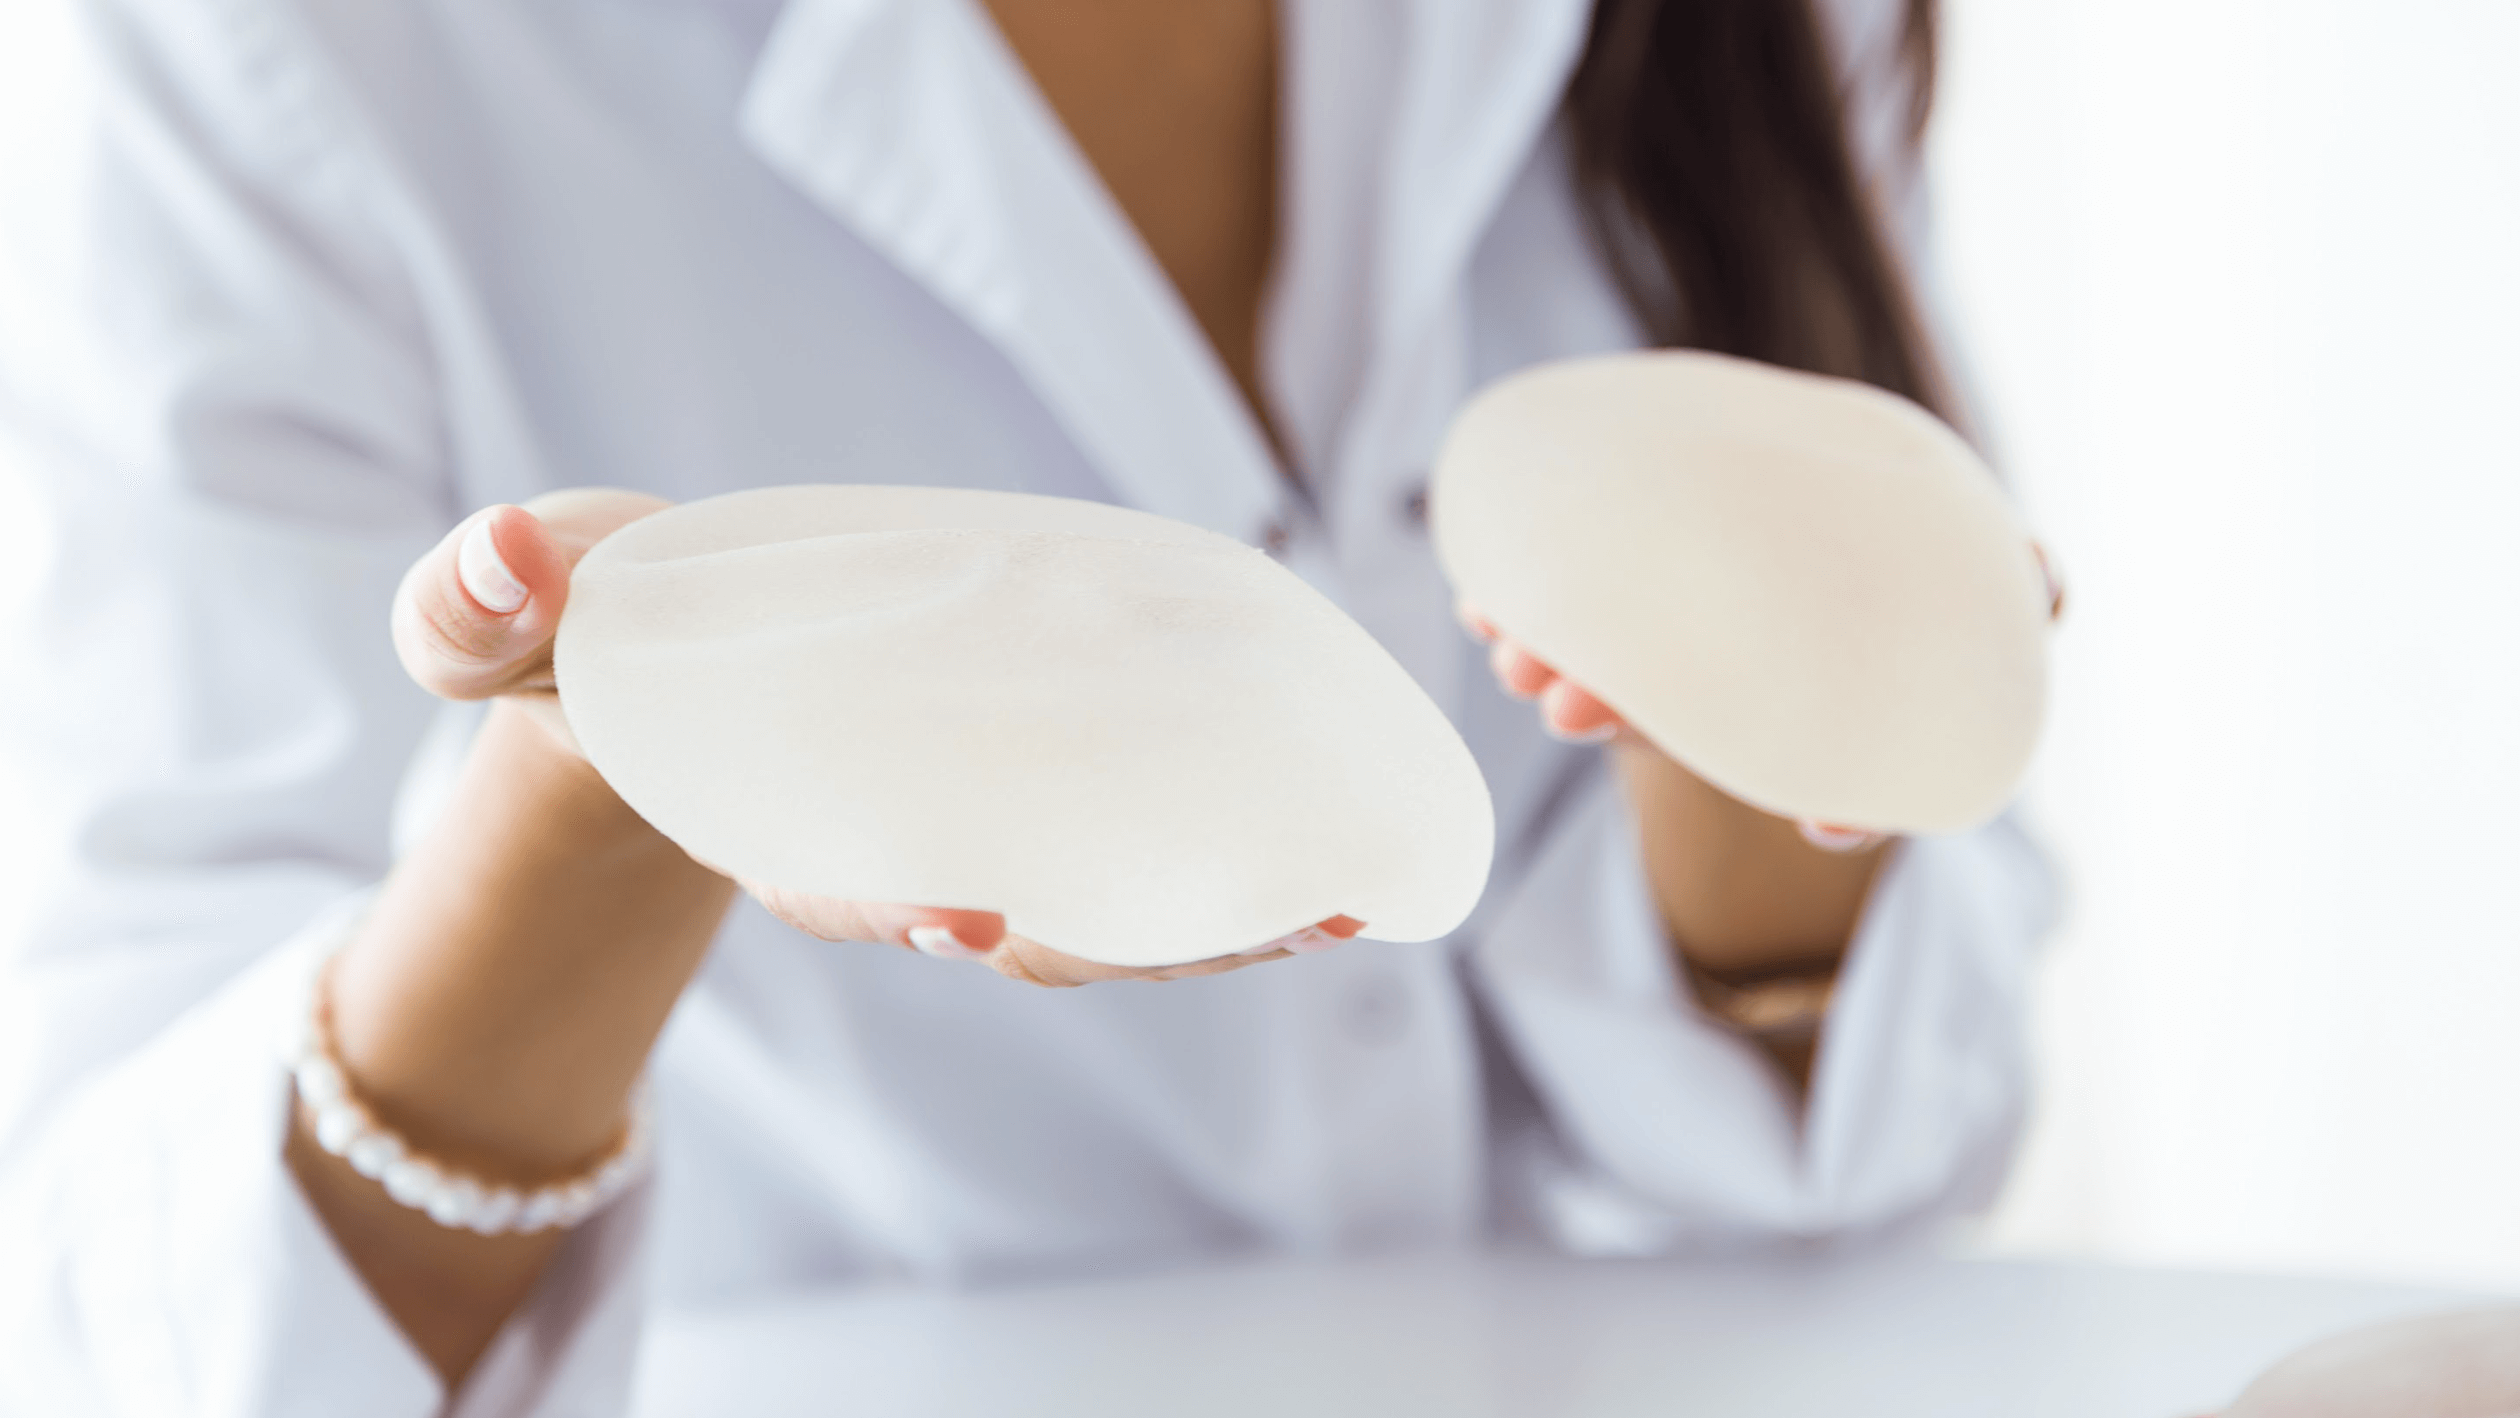 Choosing Your Breast Implants: What You Need to Know